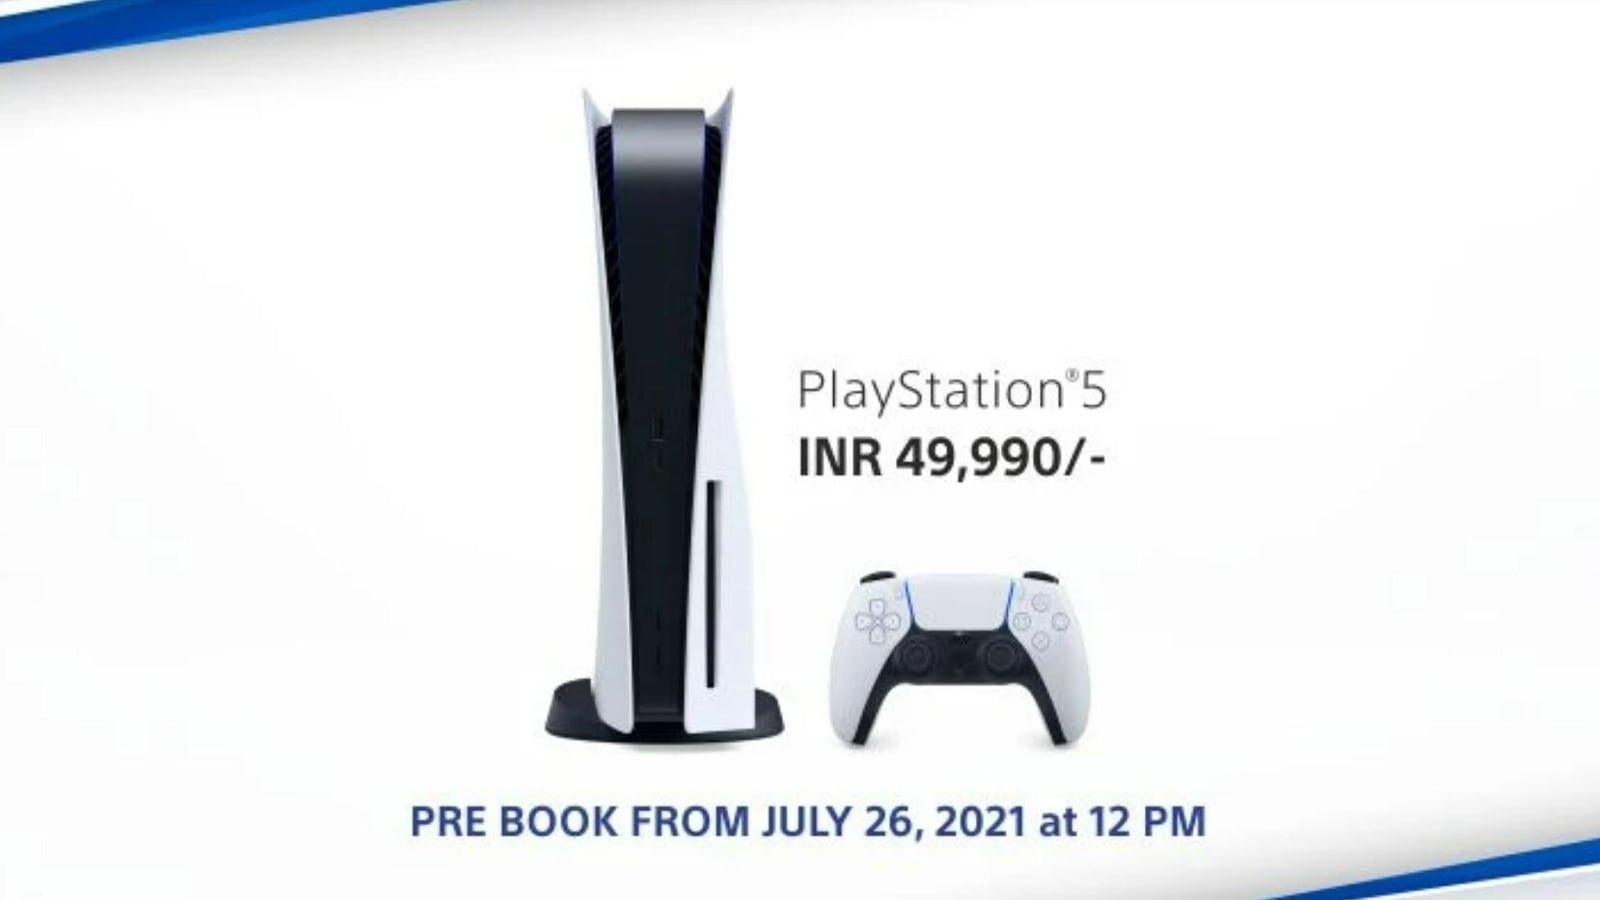 Sony Ps5 Restock In India Date And Time Good News For Gamers Pre Orders Start On July 26 Ht Tech